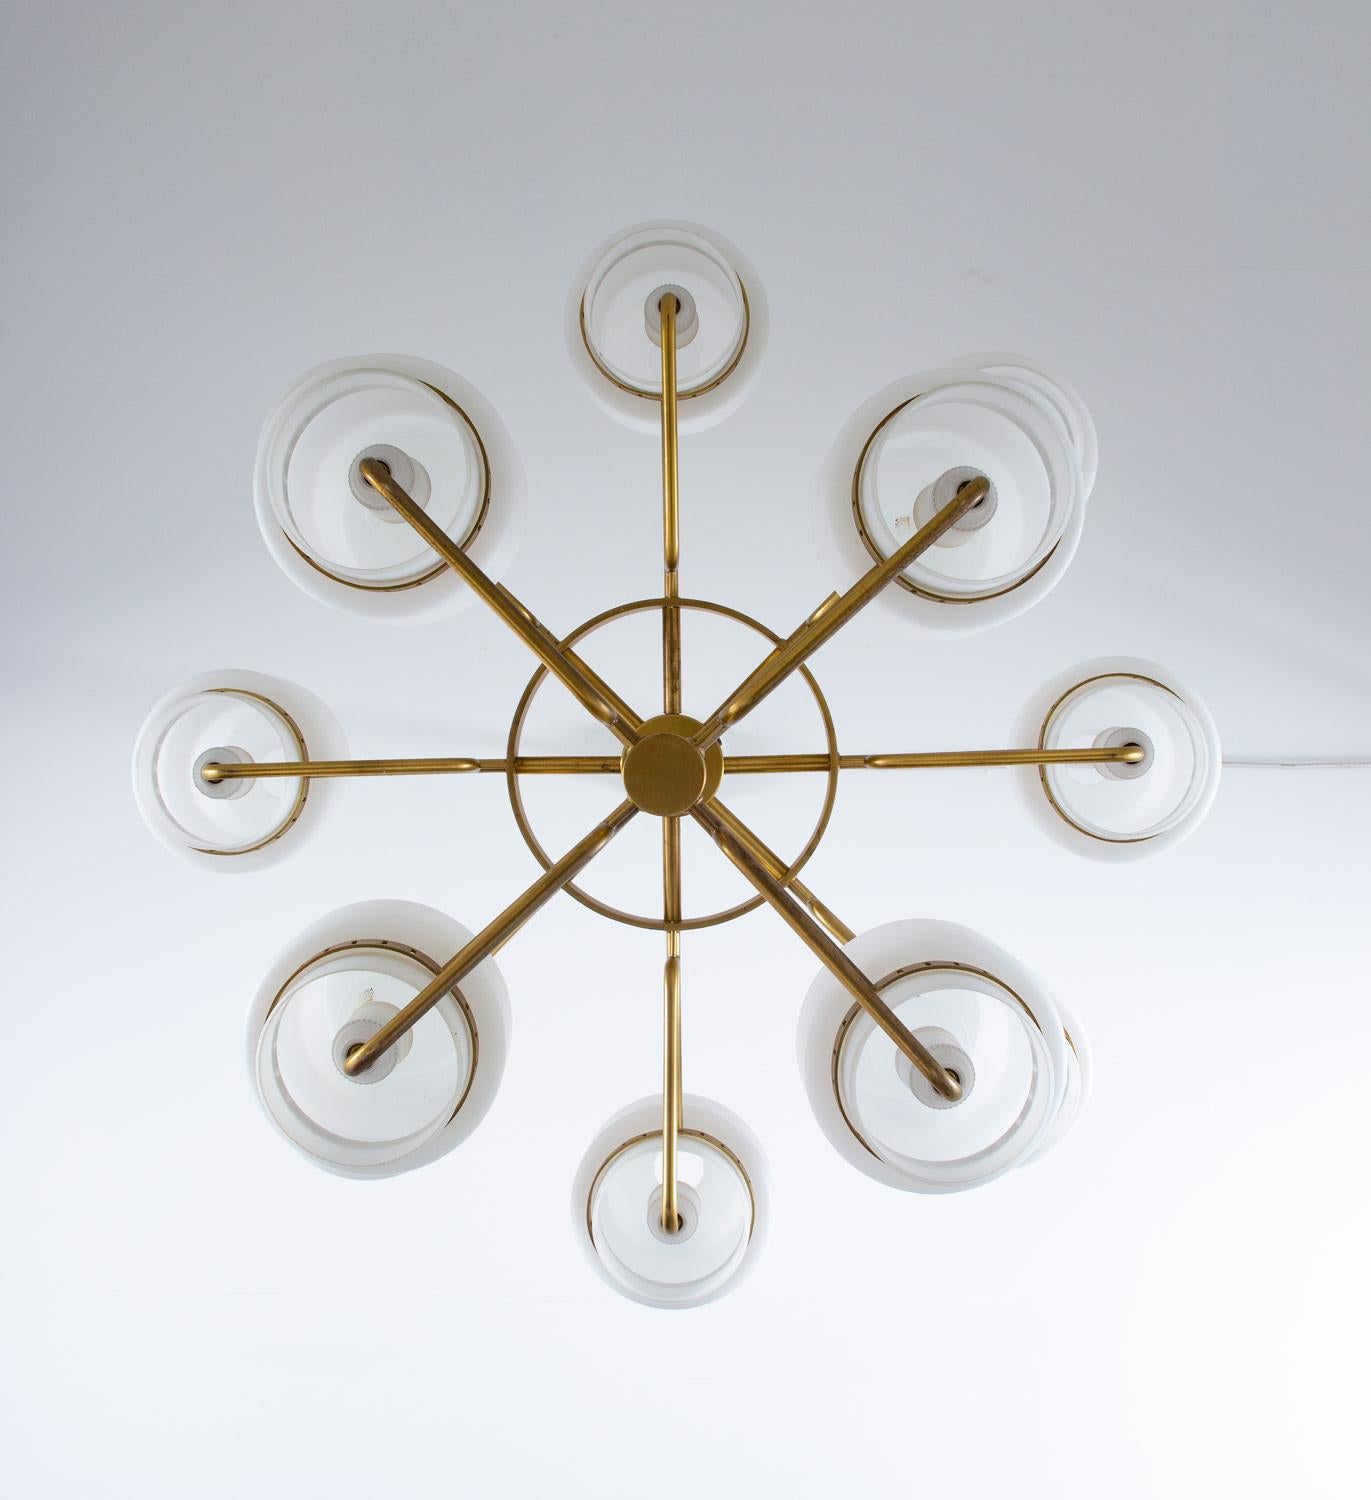 Large Swedish Midcentury Chandeliers in Brass and Frosted Opaline Glass 1